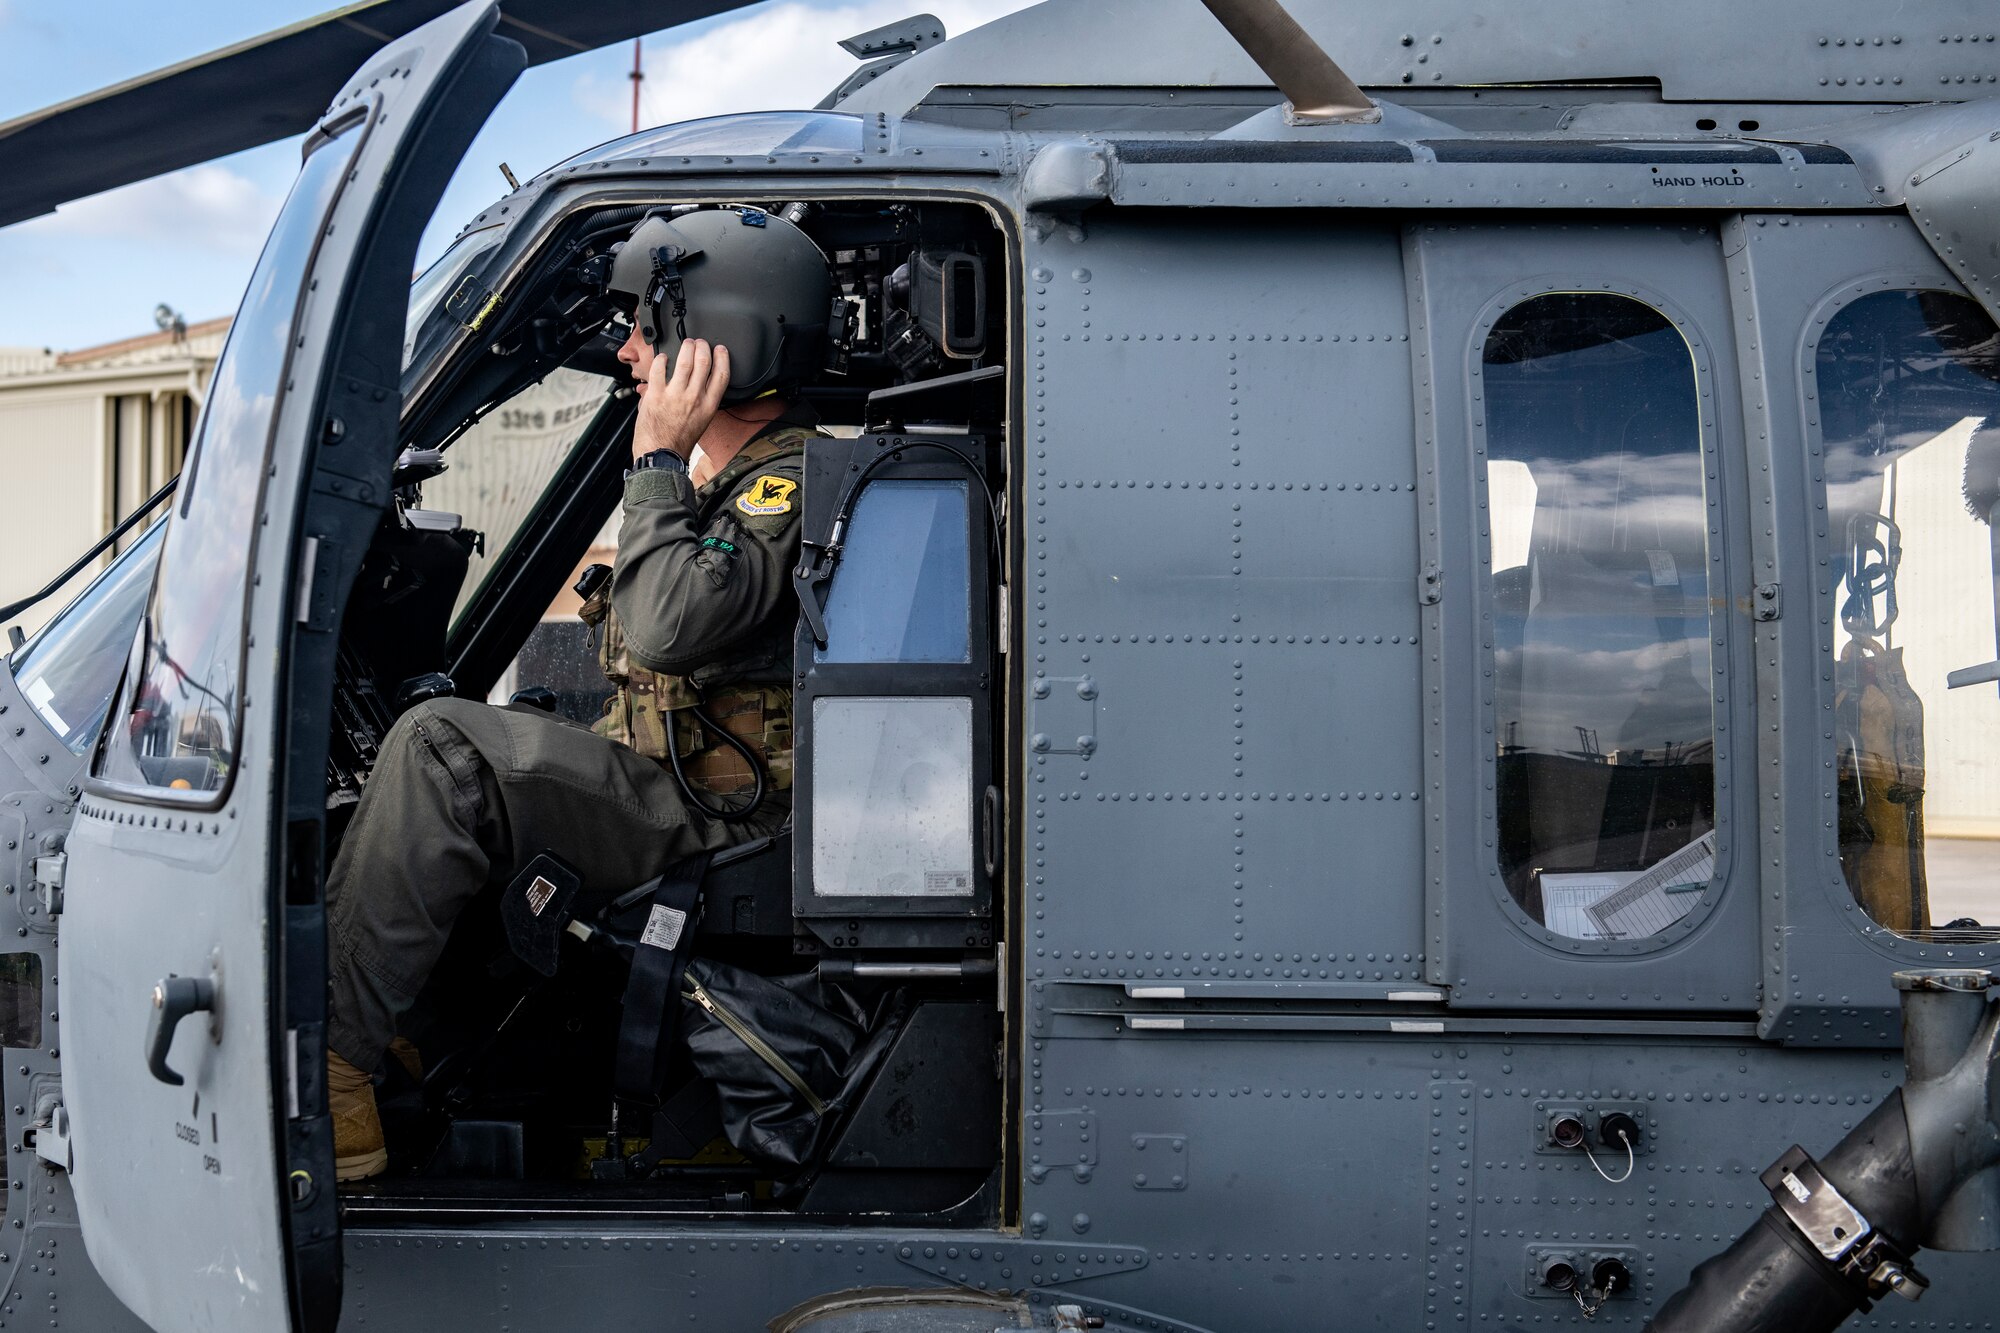 U.S Air Force 1st Lt. Trent Badger, 33rd Rescue Squadron co-pilot, boards an HH-60G Pave Hawk for a training flight at Kadena Air Base, Japan, Dec. 1, 2021. The 33rd RQS provides a reliable combat search and rescue platform to aid in exercises and real-world operations in the Indo-Pacific region. (U.S. Air Force photo by Senior Airman Jessi Monte)